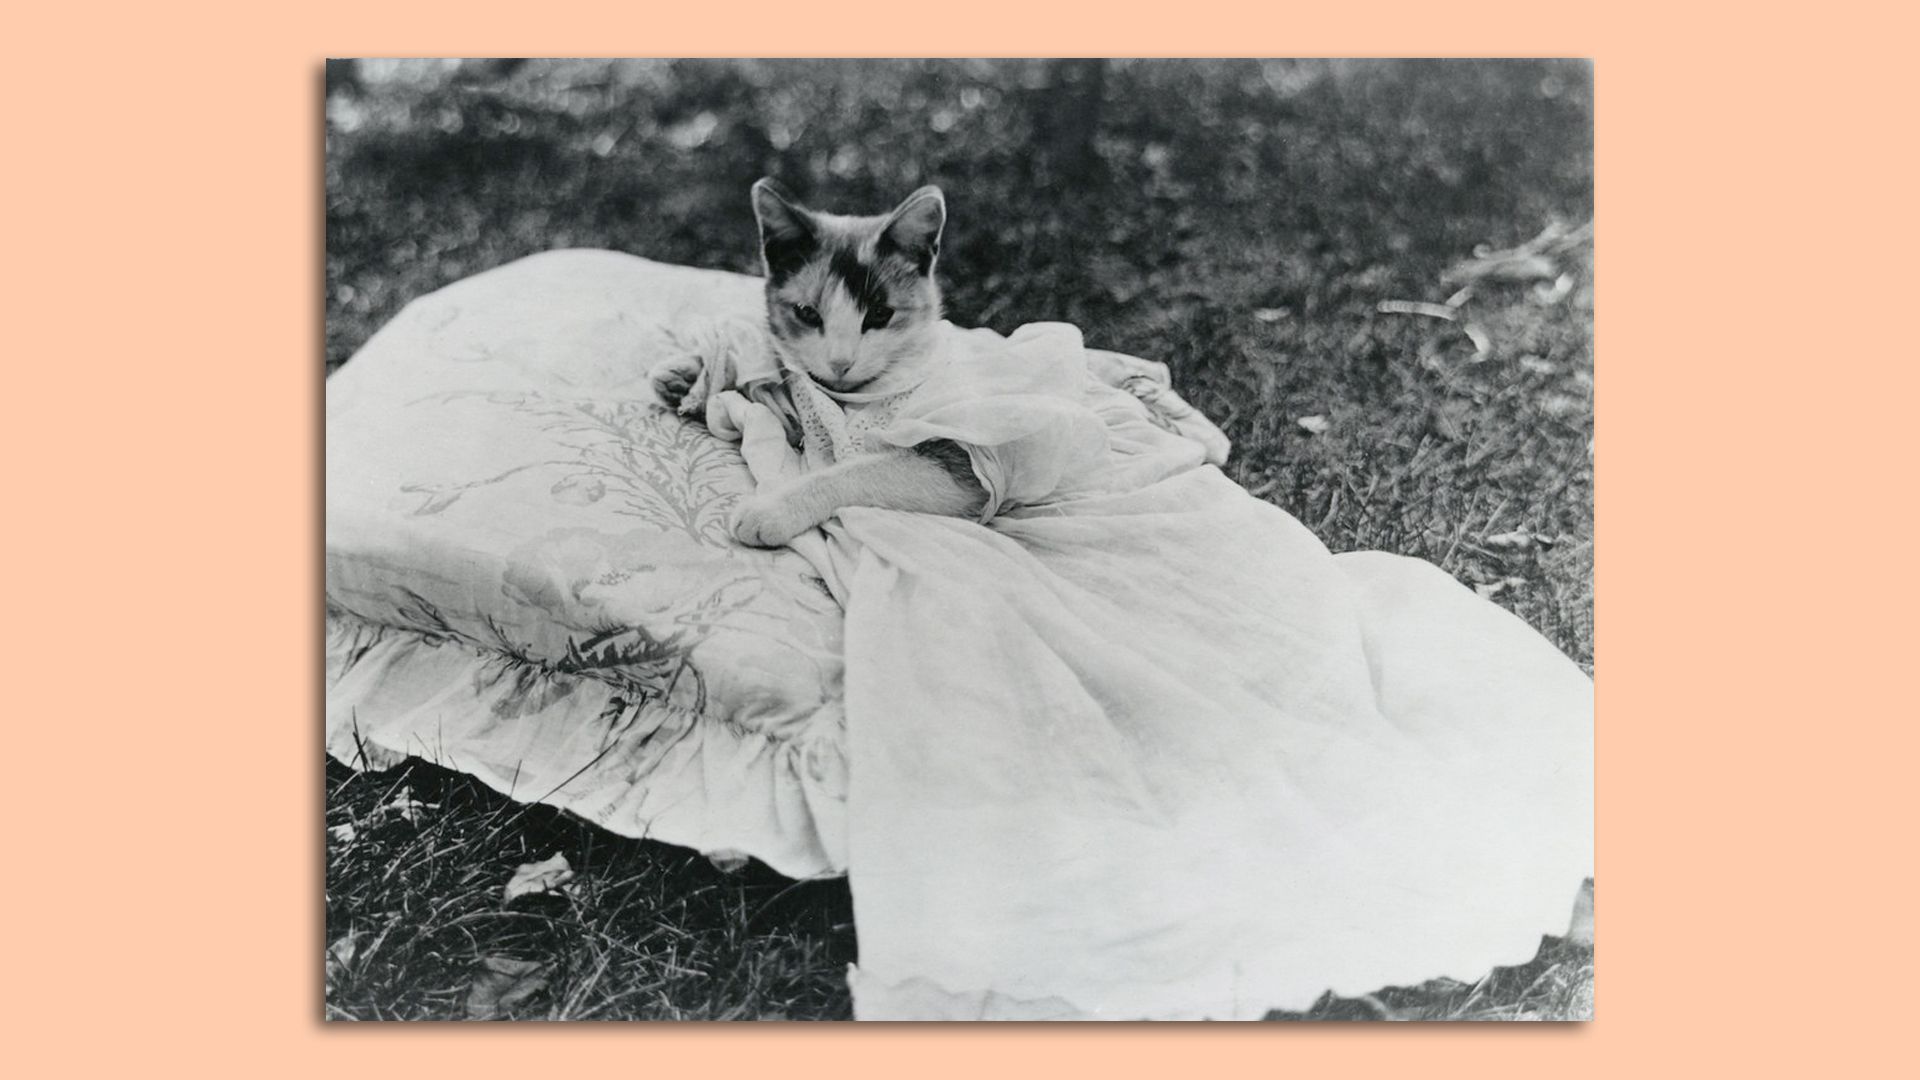 A 100-year-old cat photo from photographer E.M. Clark.